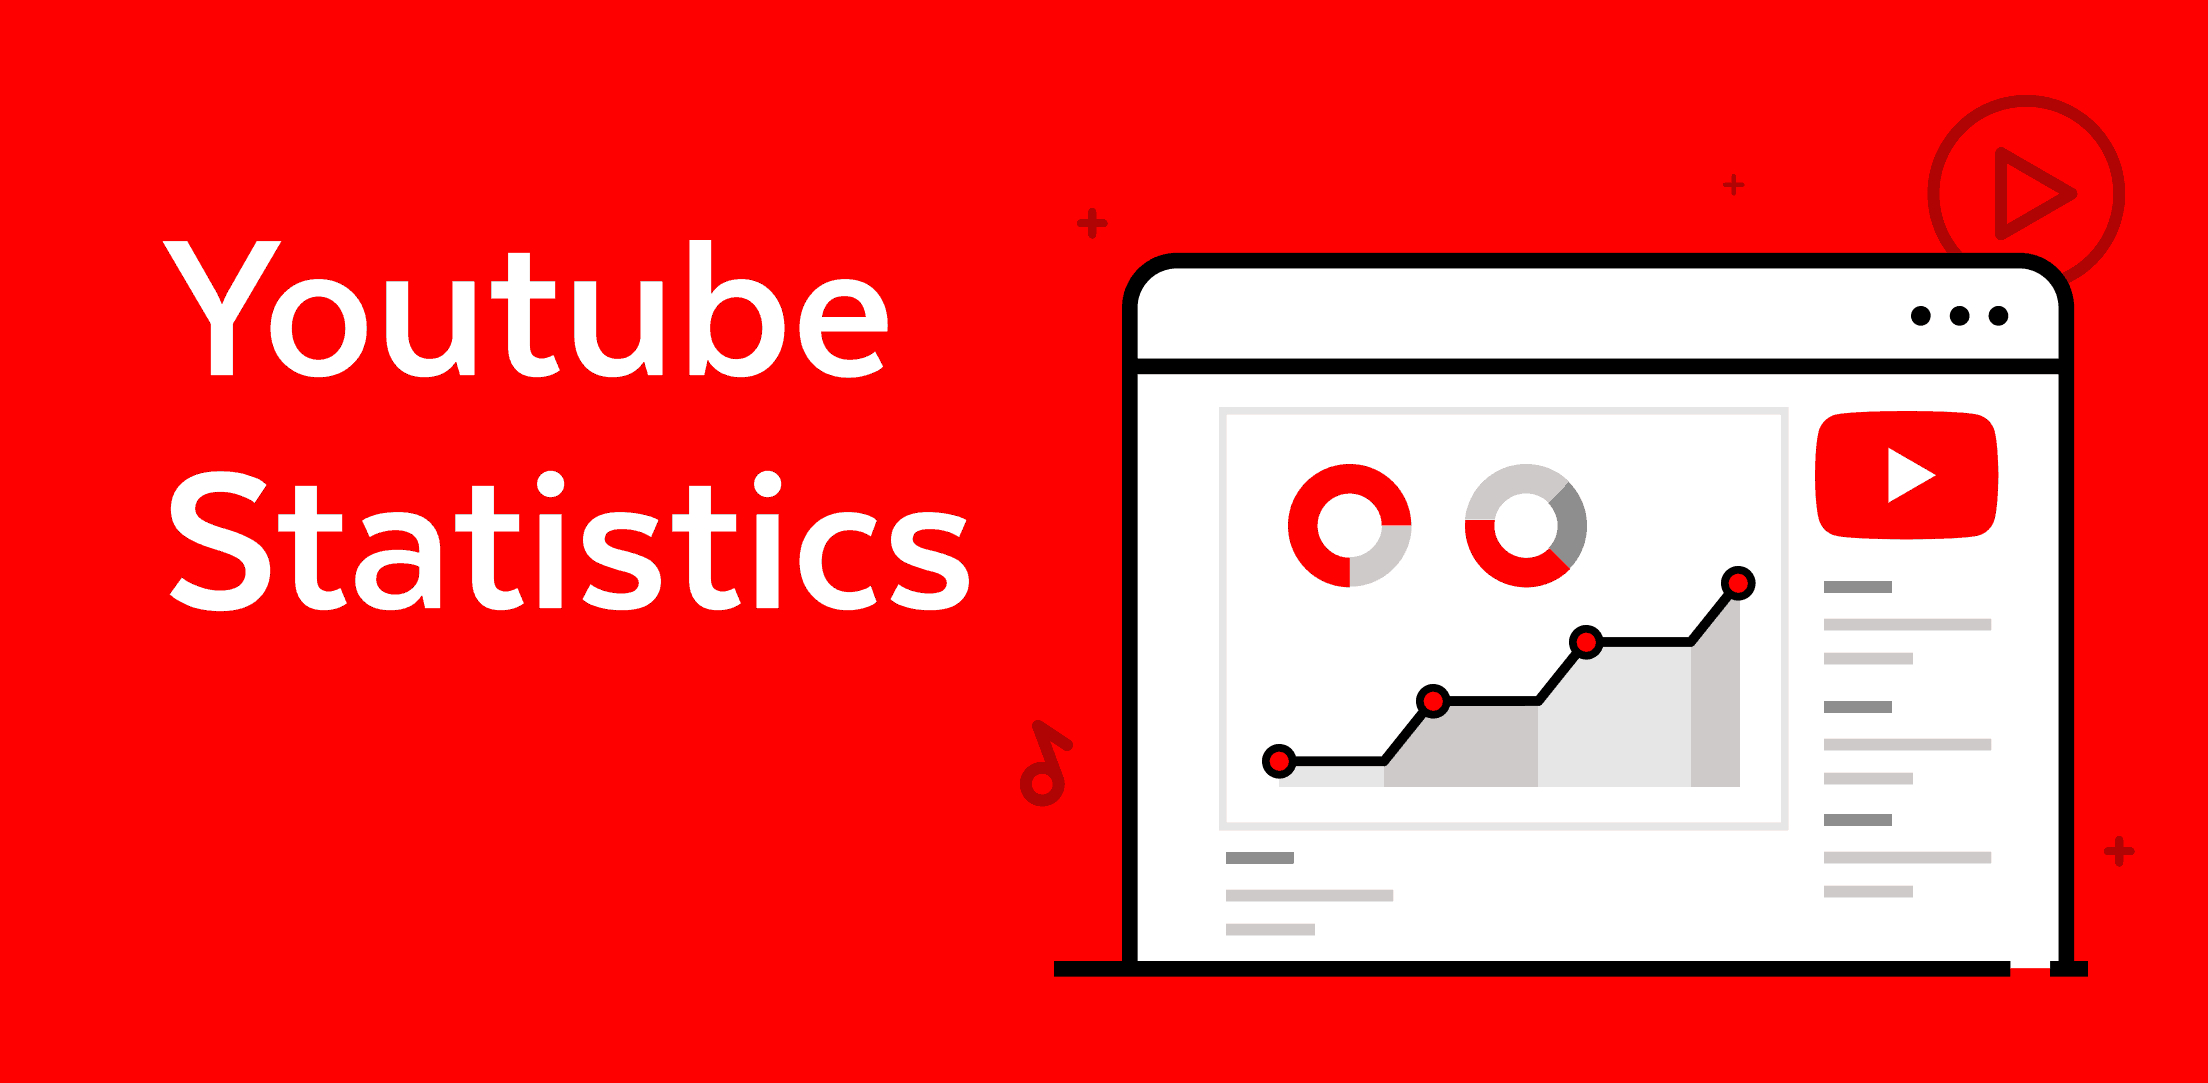 YouTube Statistics That You Need To Know In 2022